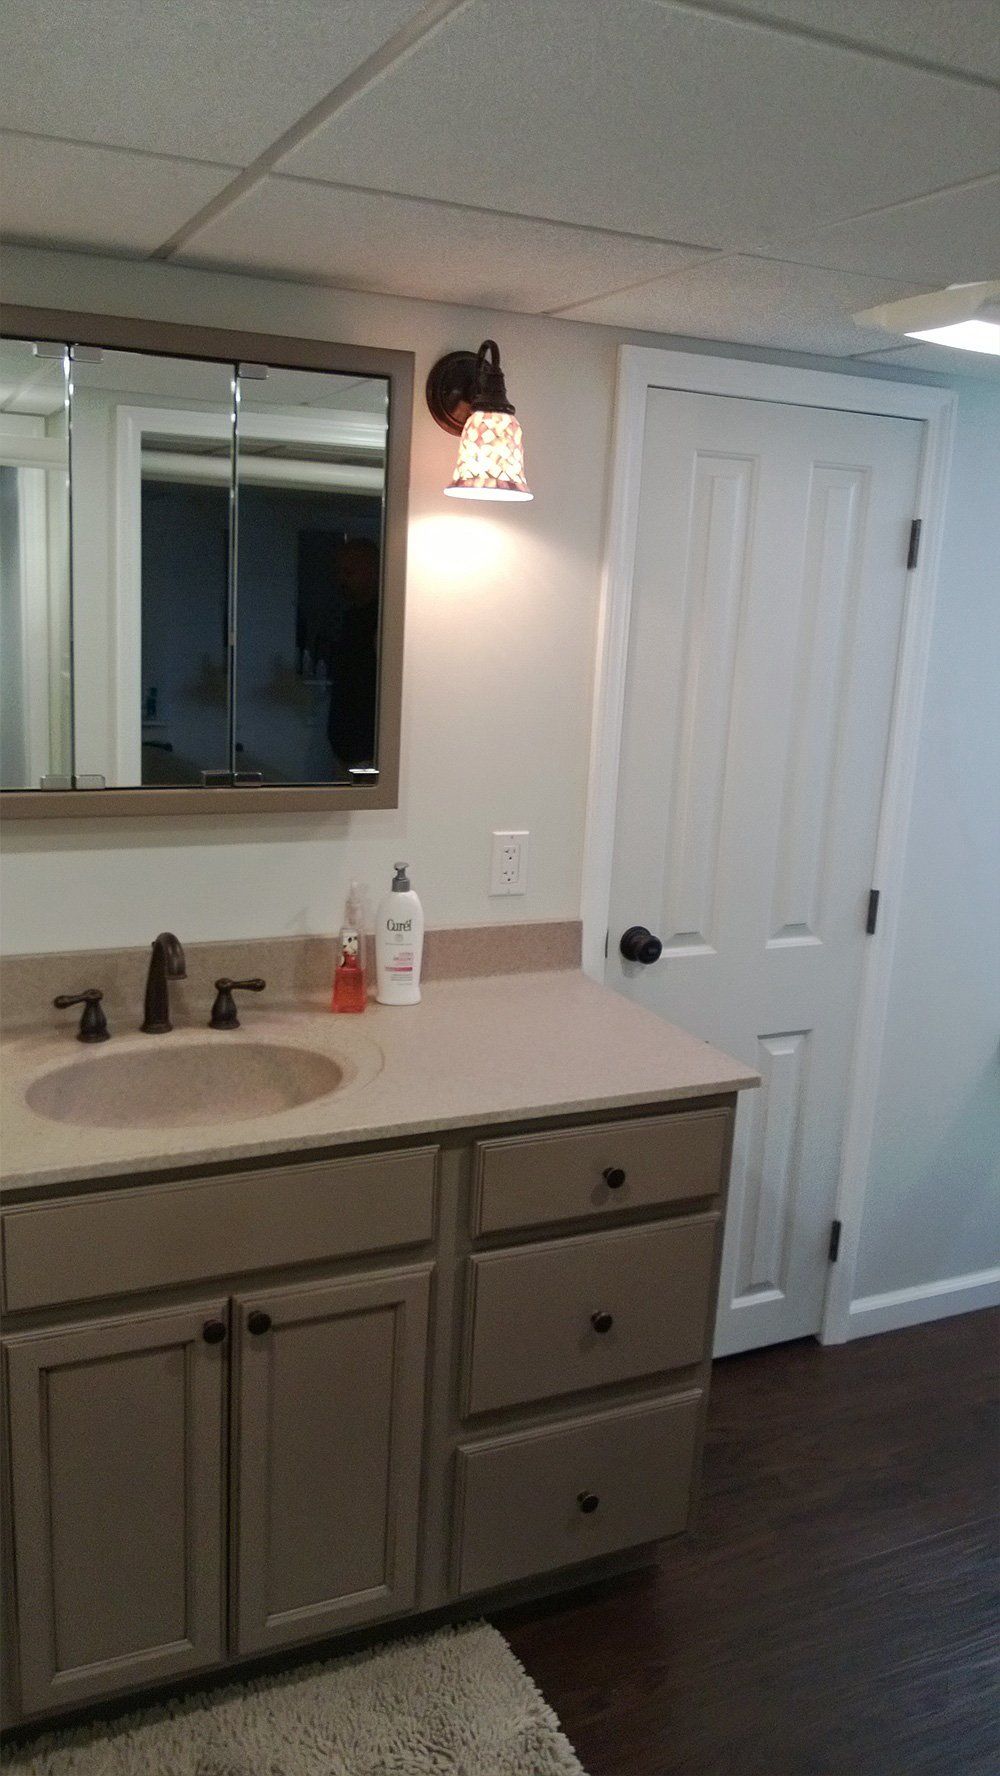 Bathroom Interior -  Remodeling Services in Slippery Rock, PA